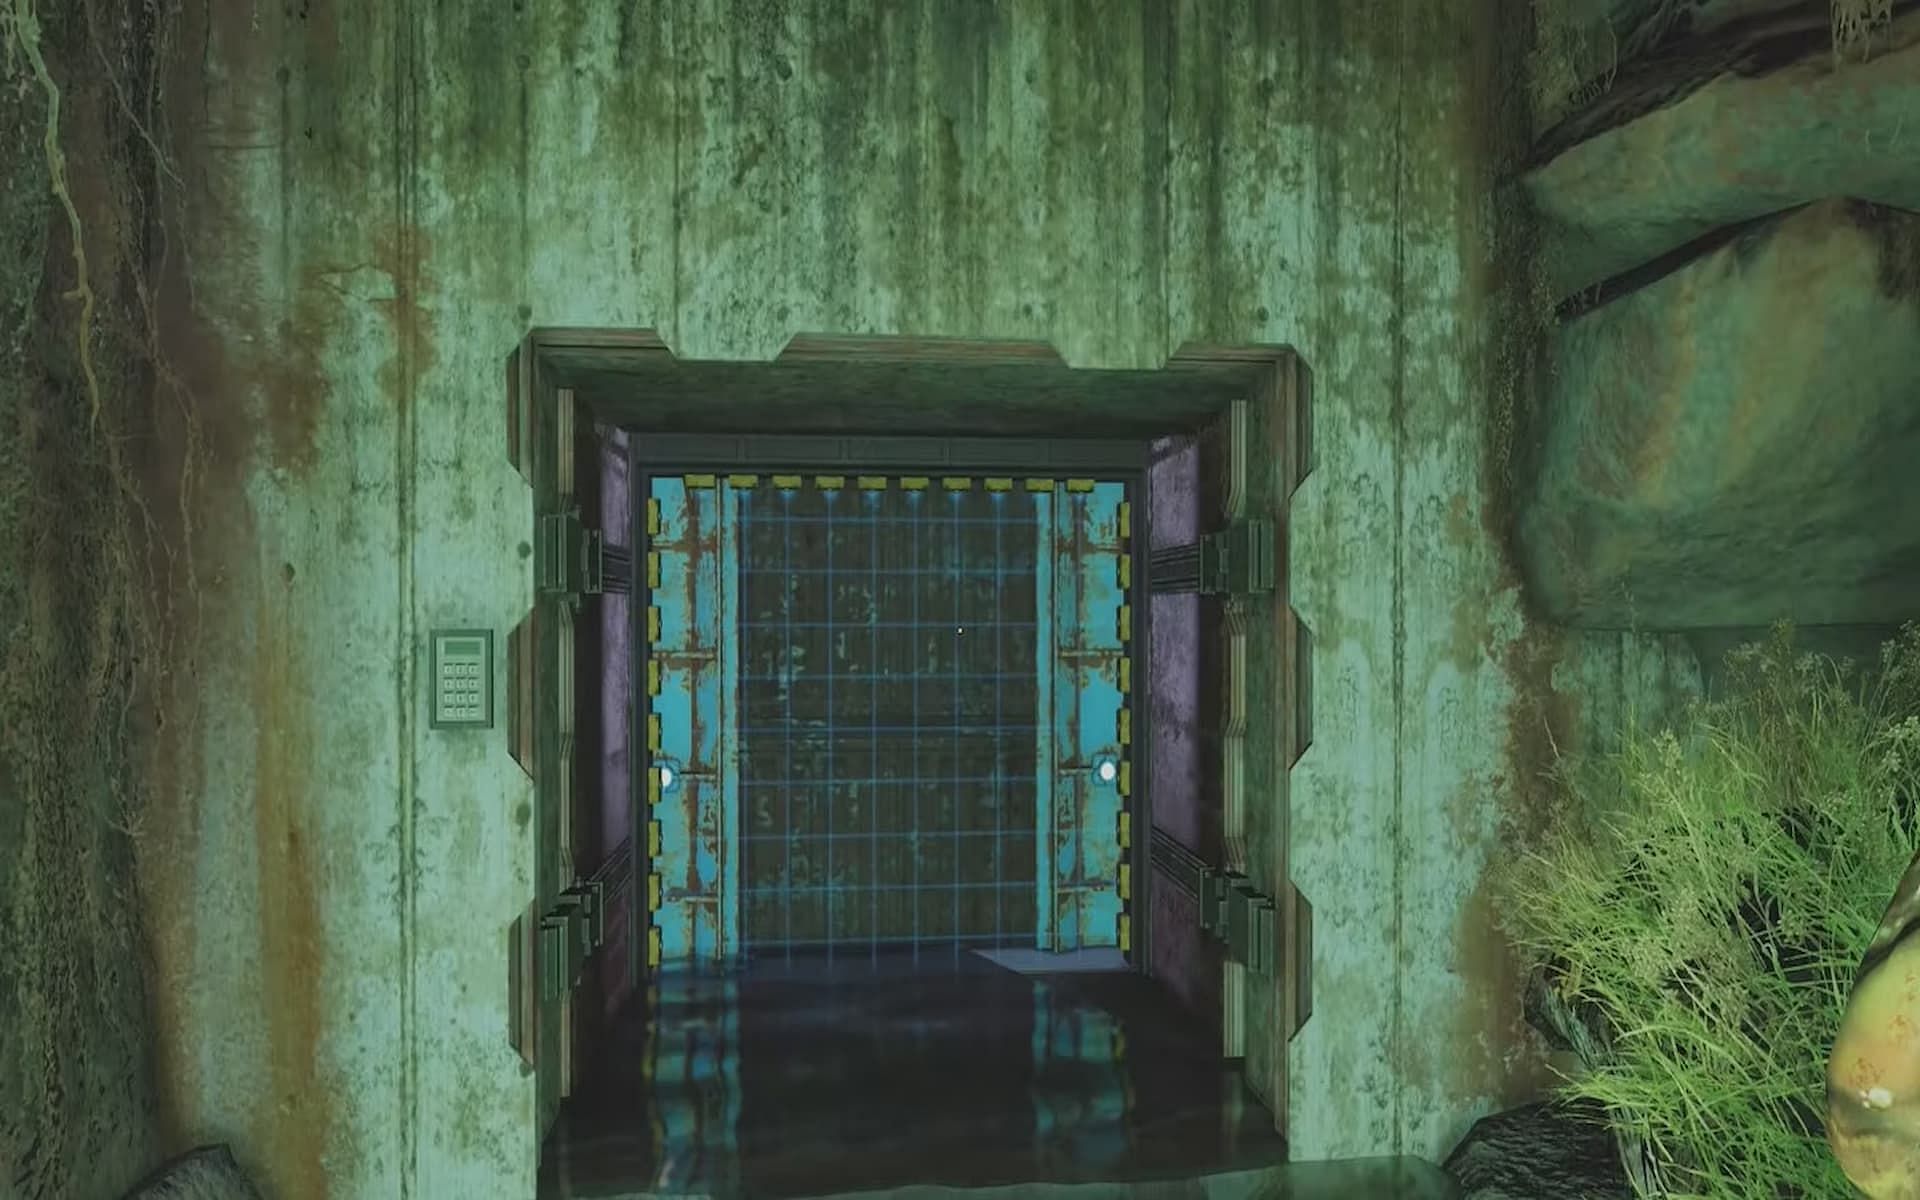 The Mysterious Cave holds the code to open a vault in Fallout 76 (Image via Bethesda)